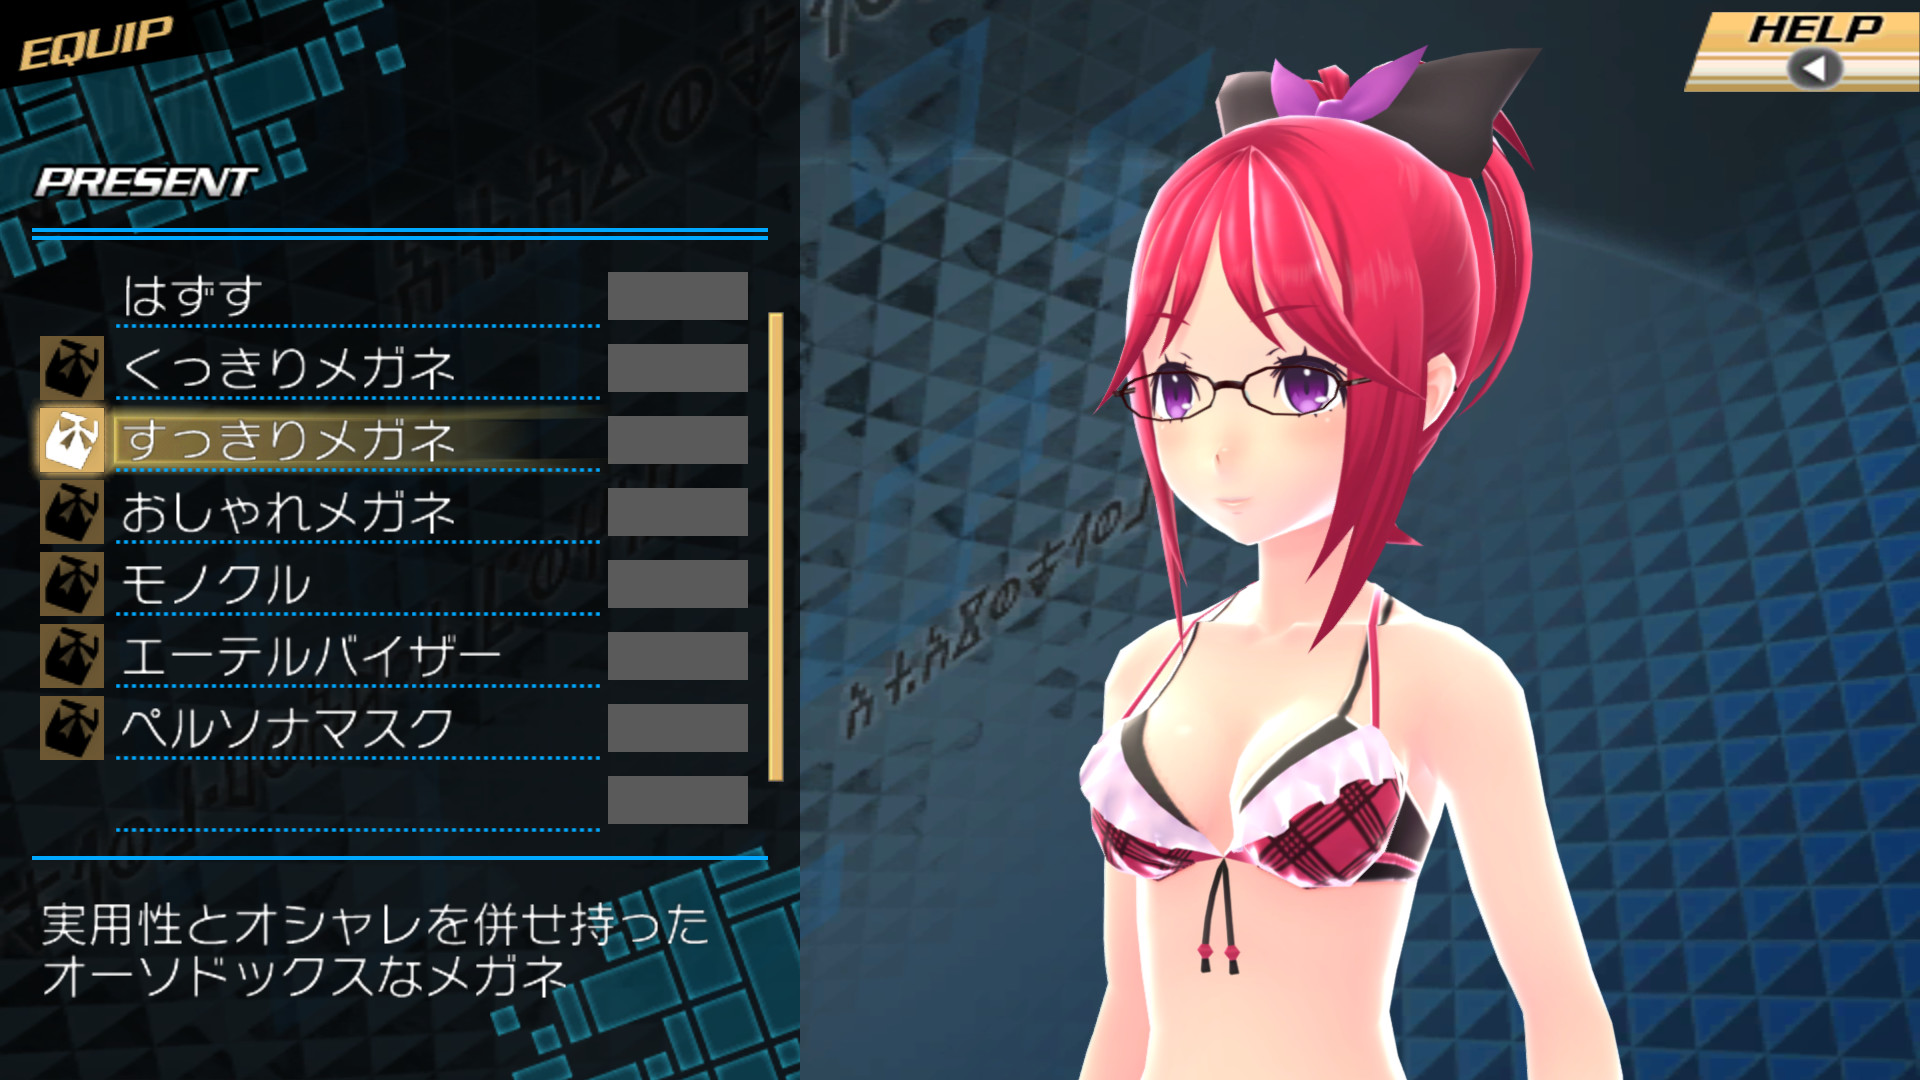 Conception II: Children of the Seven Stars Review - A Matchmaking